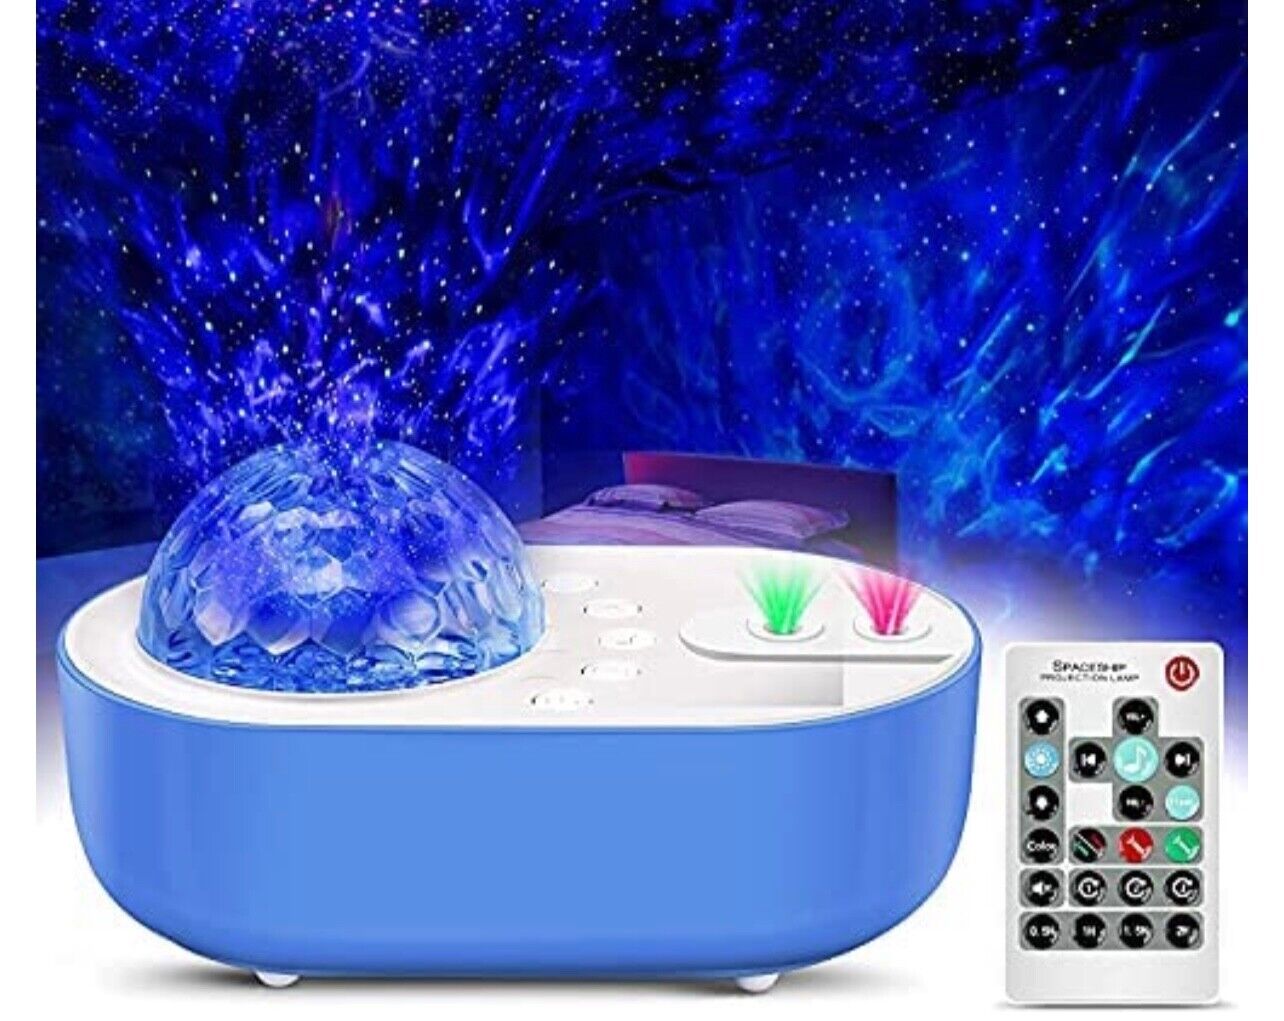 The Spaceship Projection Lamp 10 Colors, 2 Lasers Remote Music Bluetooth Usb